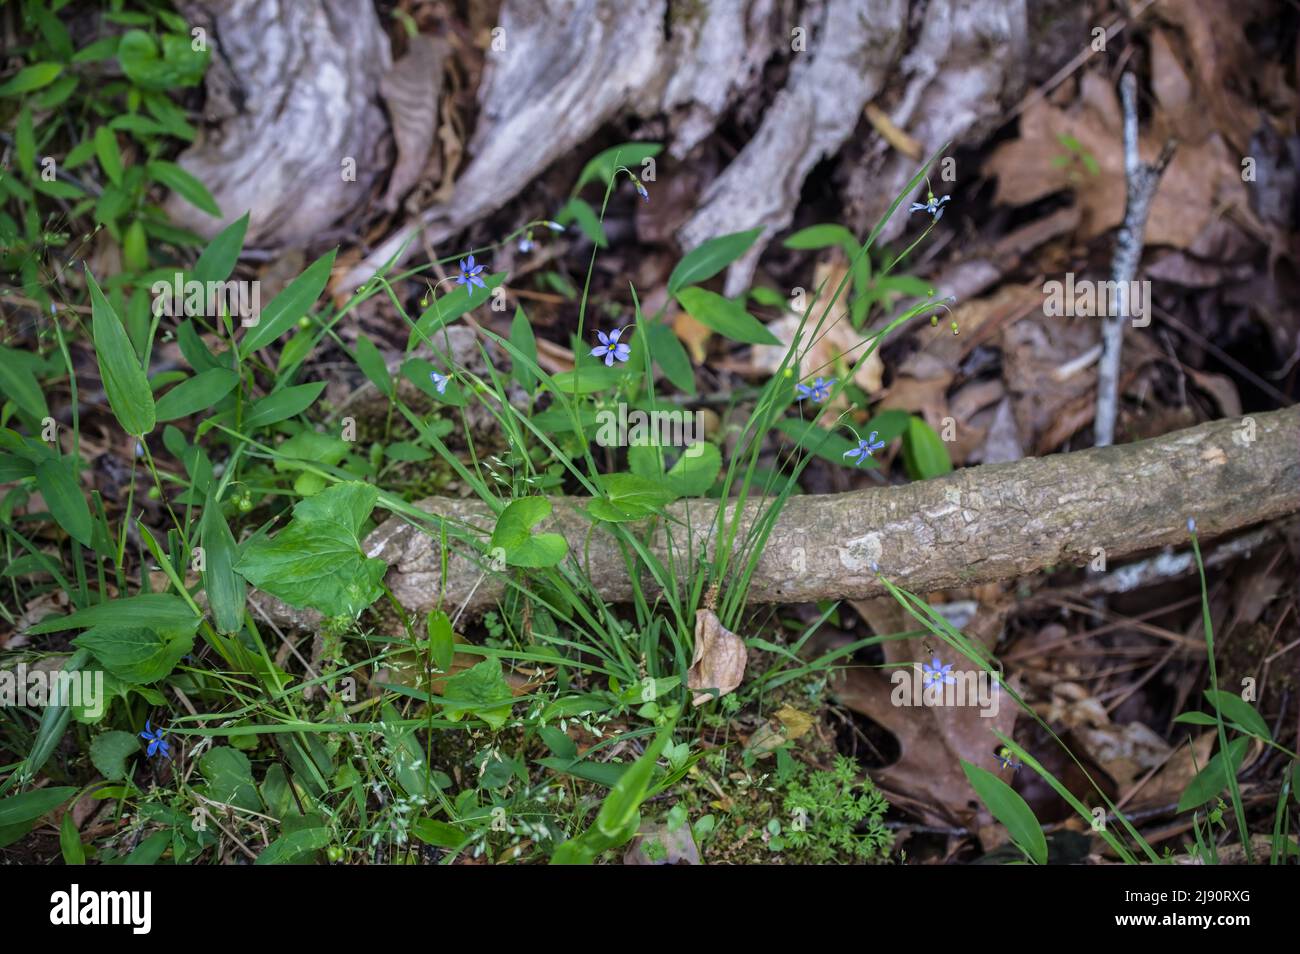 A clump of blue-eyed grass fully opened growing in the forest on the ground surrounded by woodland debris Stock Photo